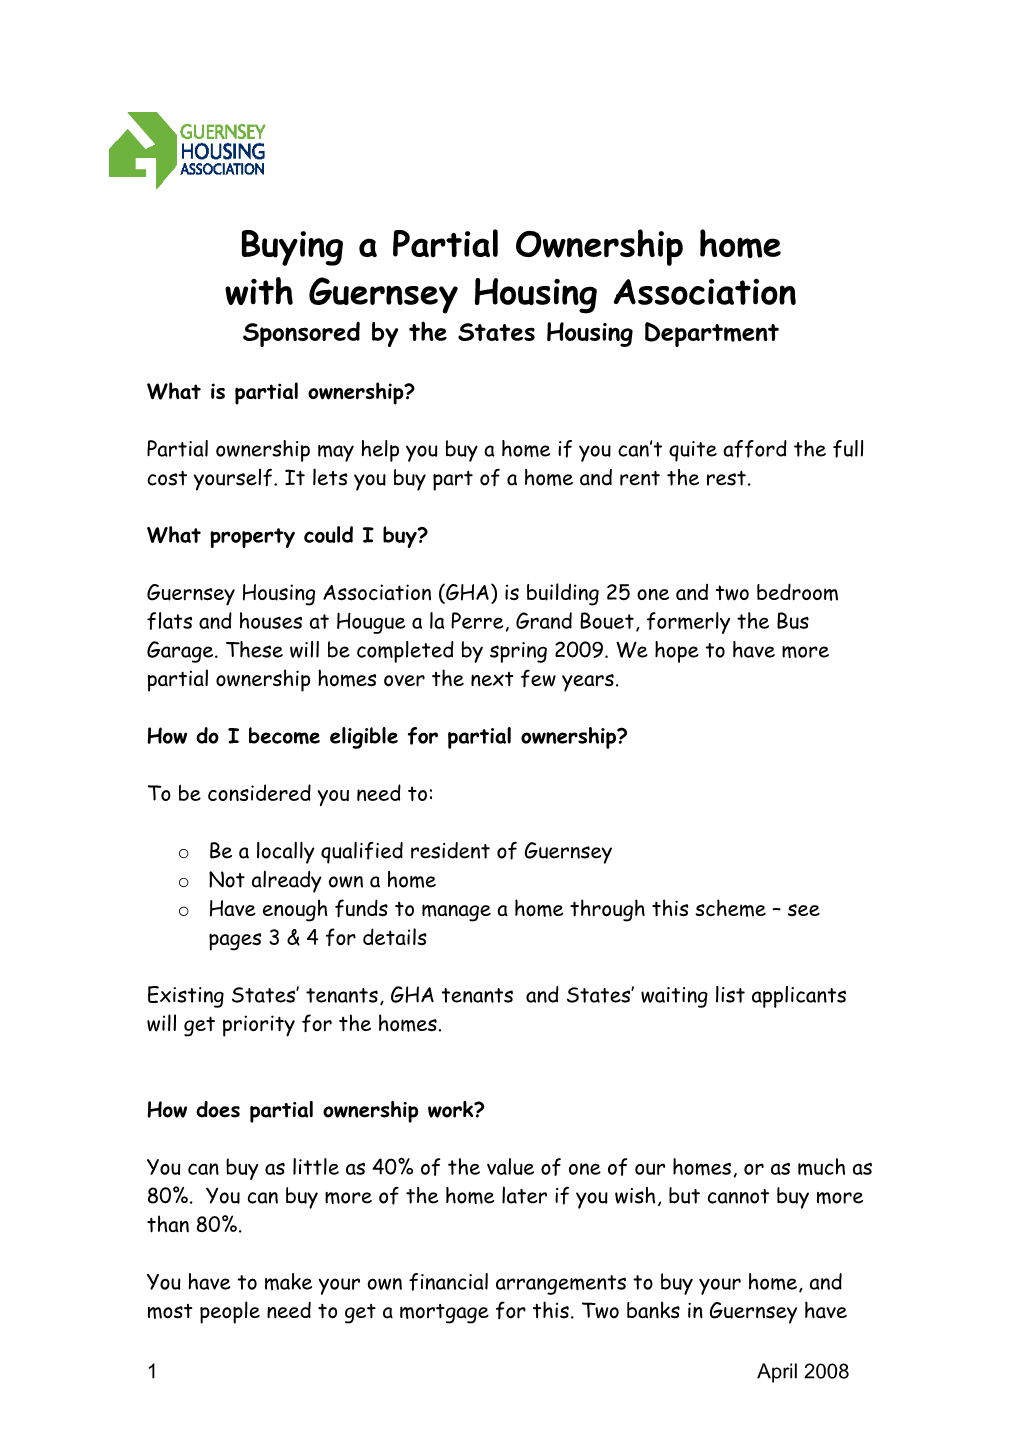 What Is Partial Ownership